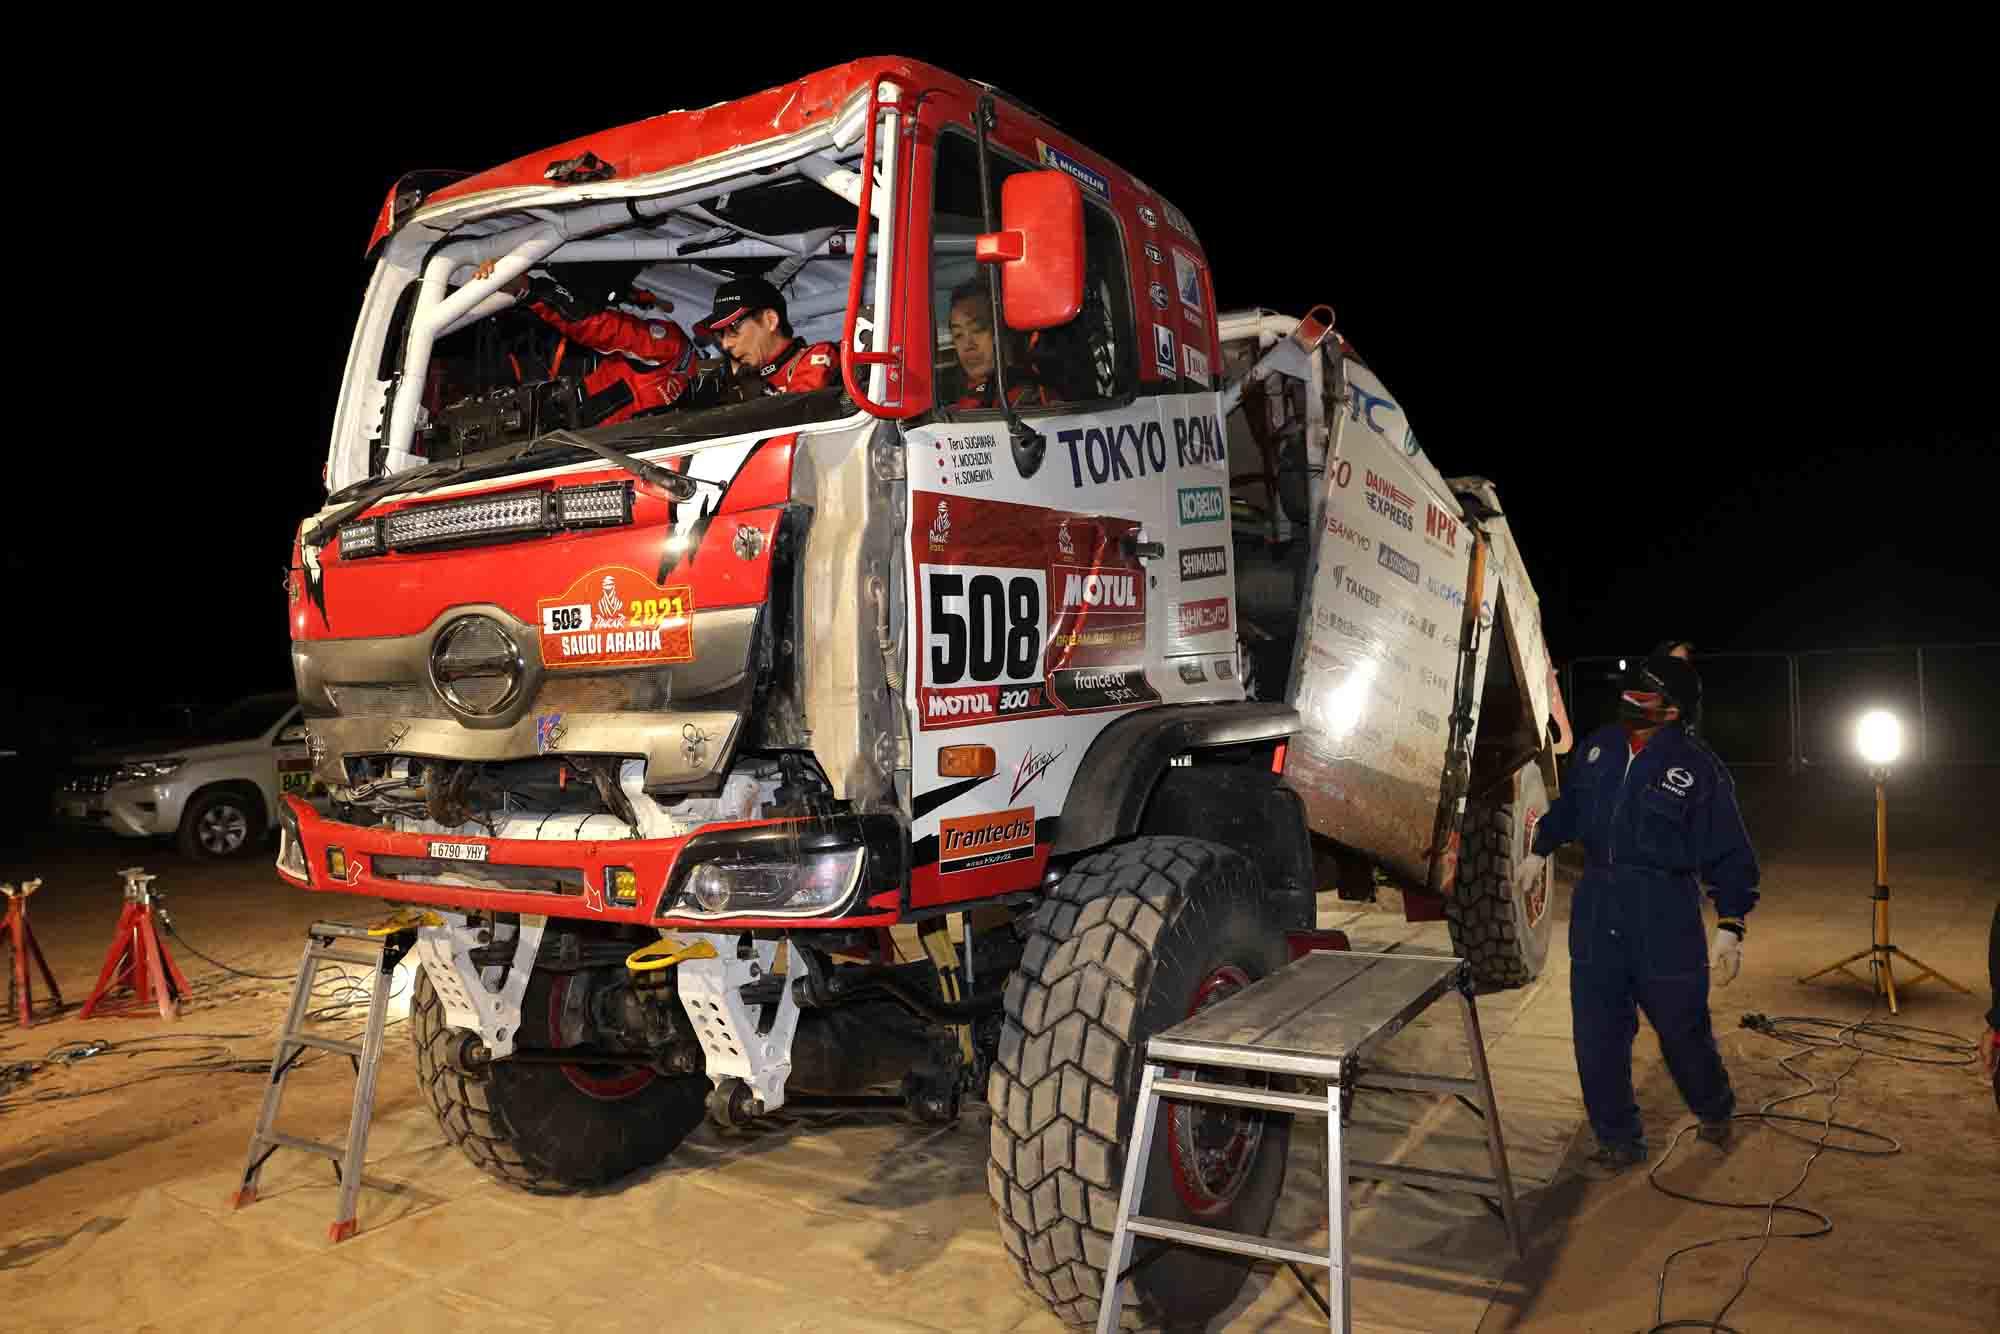 The team's HINO500 Series truck arrived at the bivouac at around 7:30
　1N9A4212.jpg